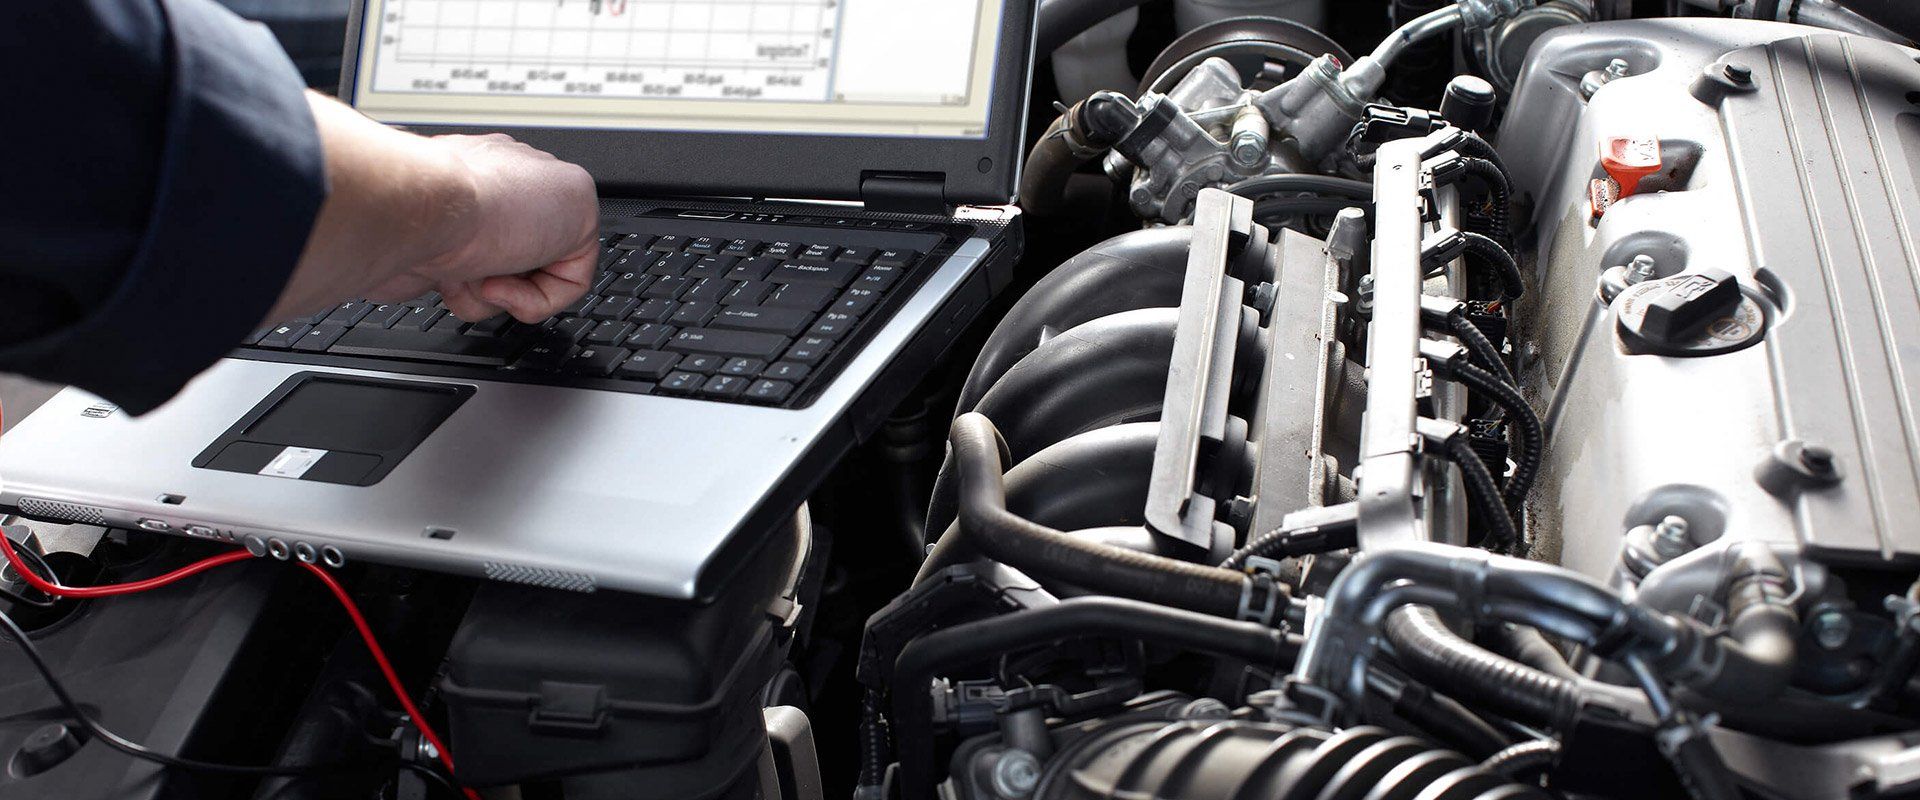 A man is working on a car engine with a laptop.